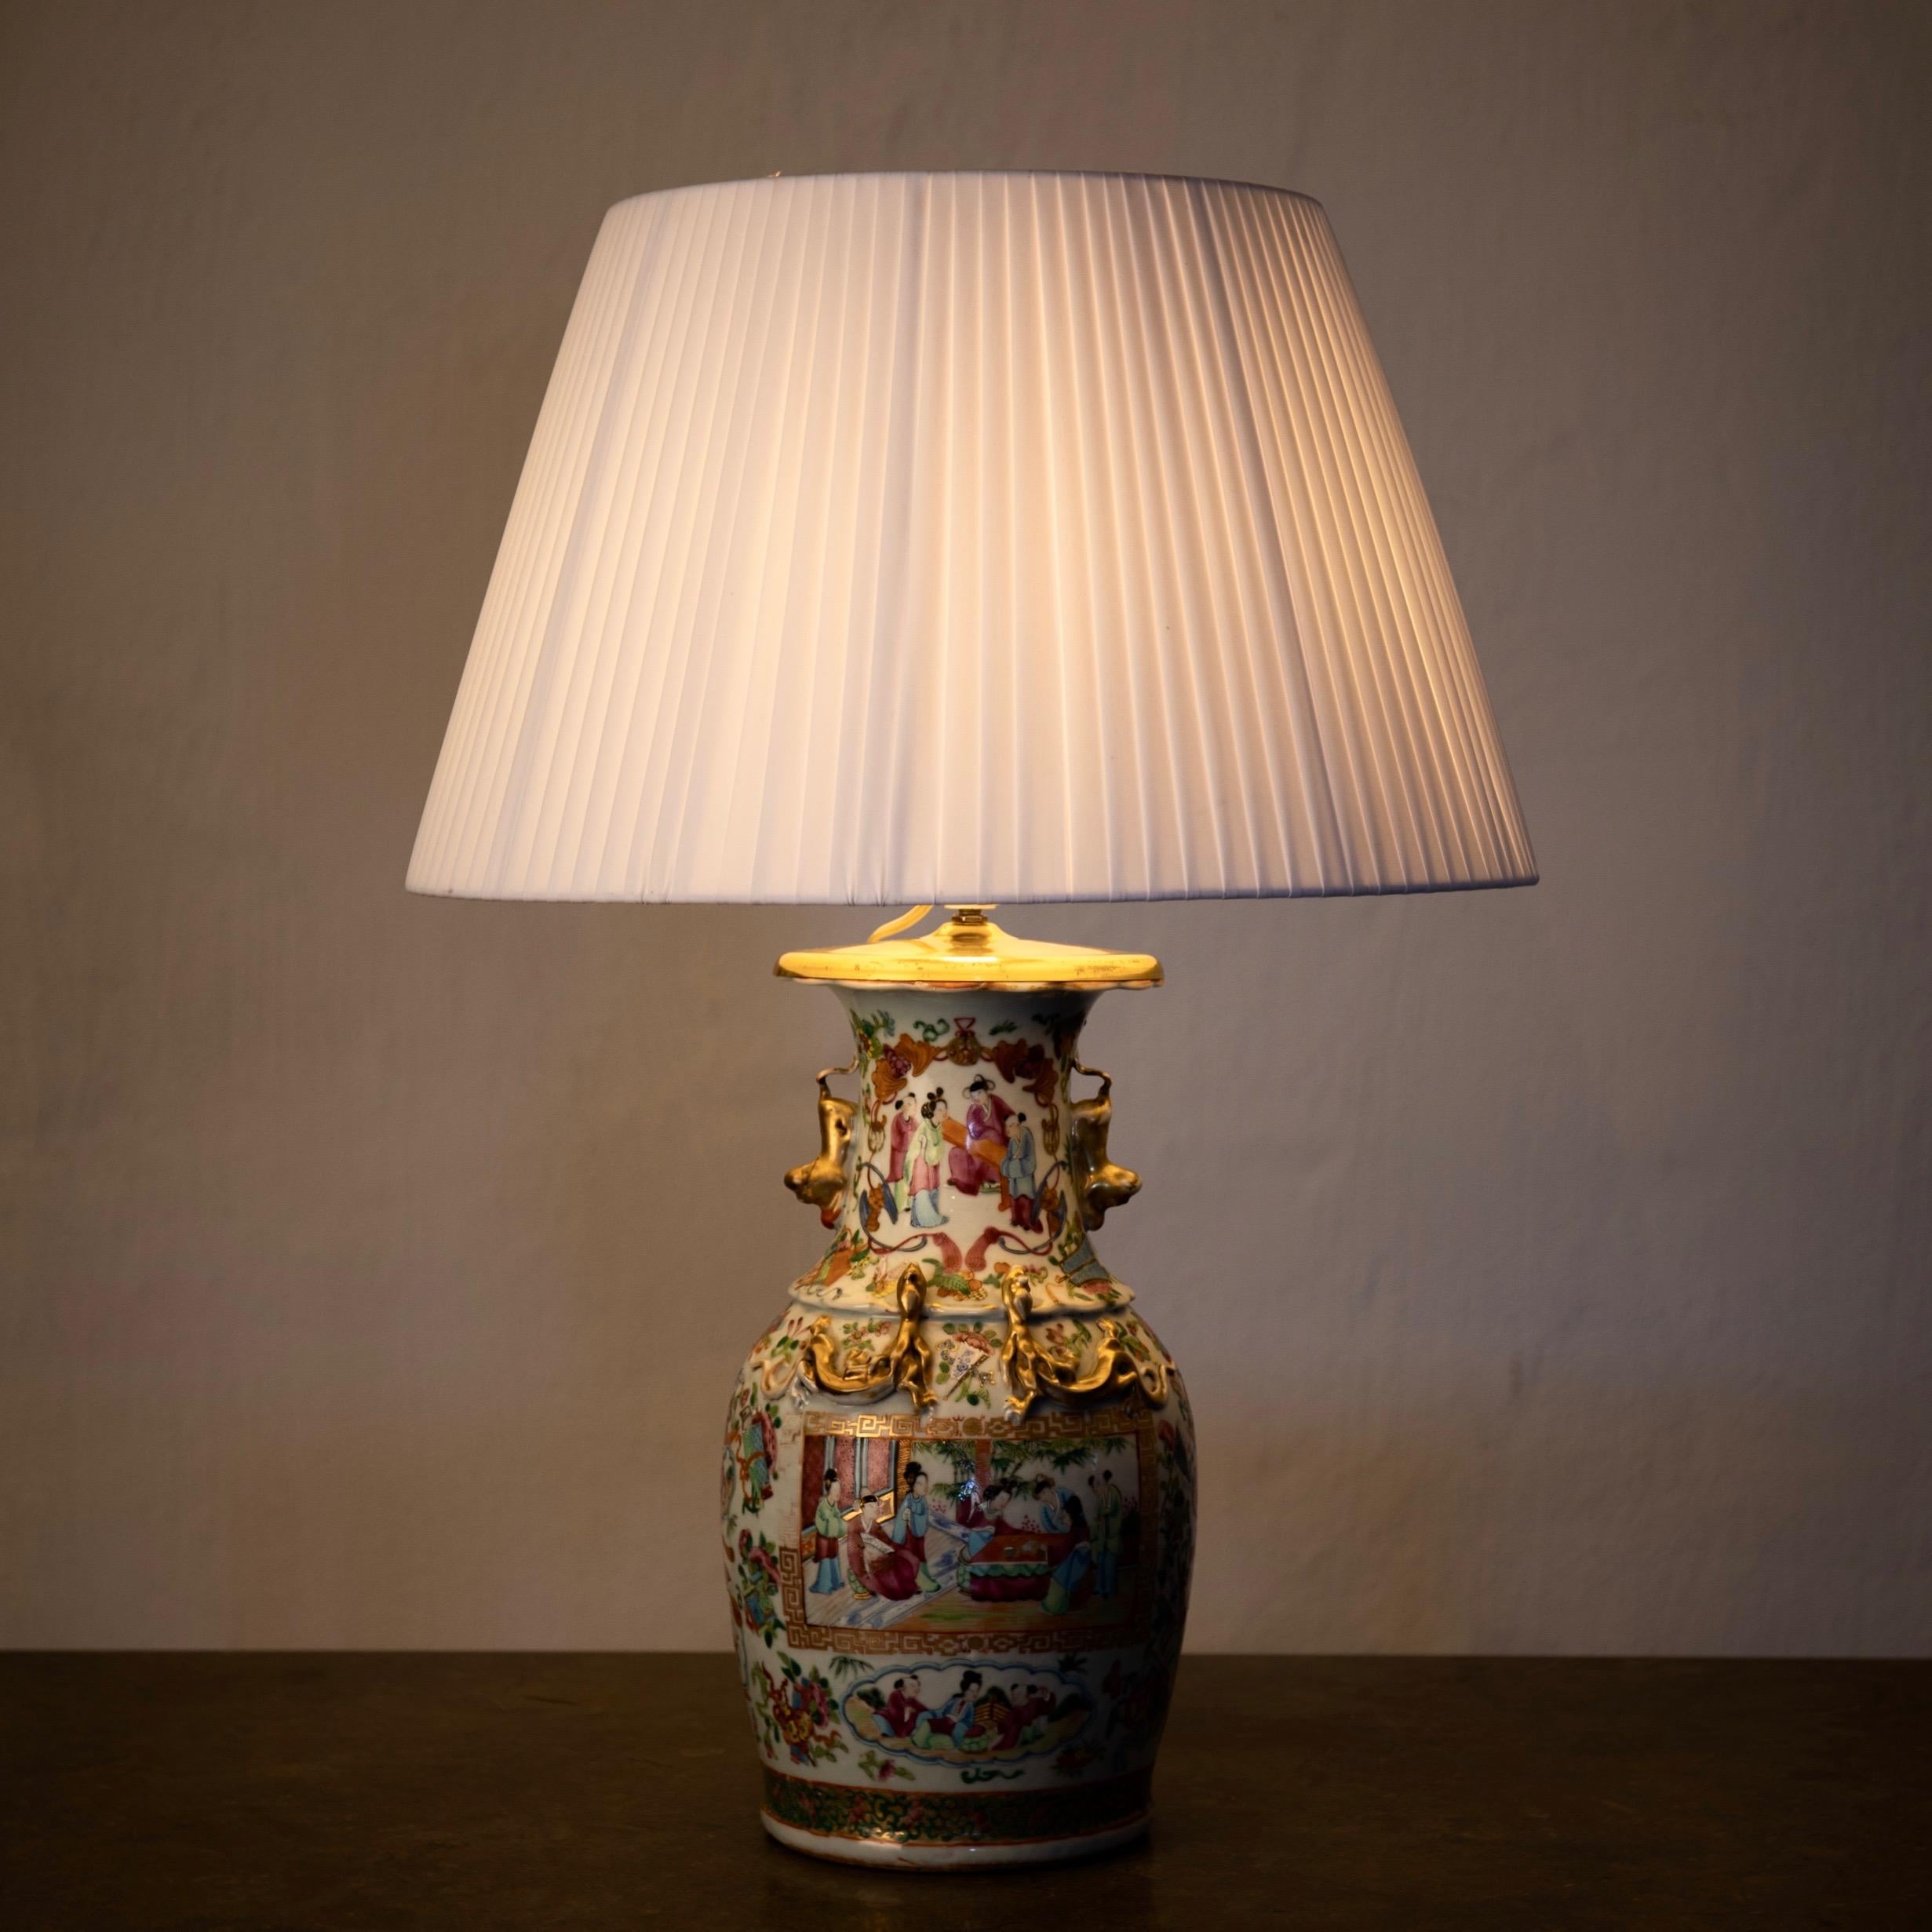 Table lamp oriental colors 19th century, China. A table lamp made during the 19th century in China. Multicolored with gilded details.